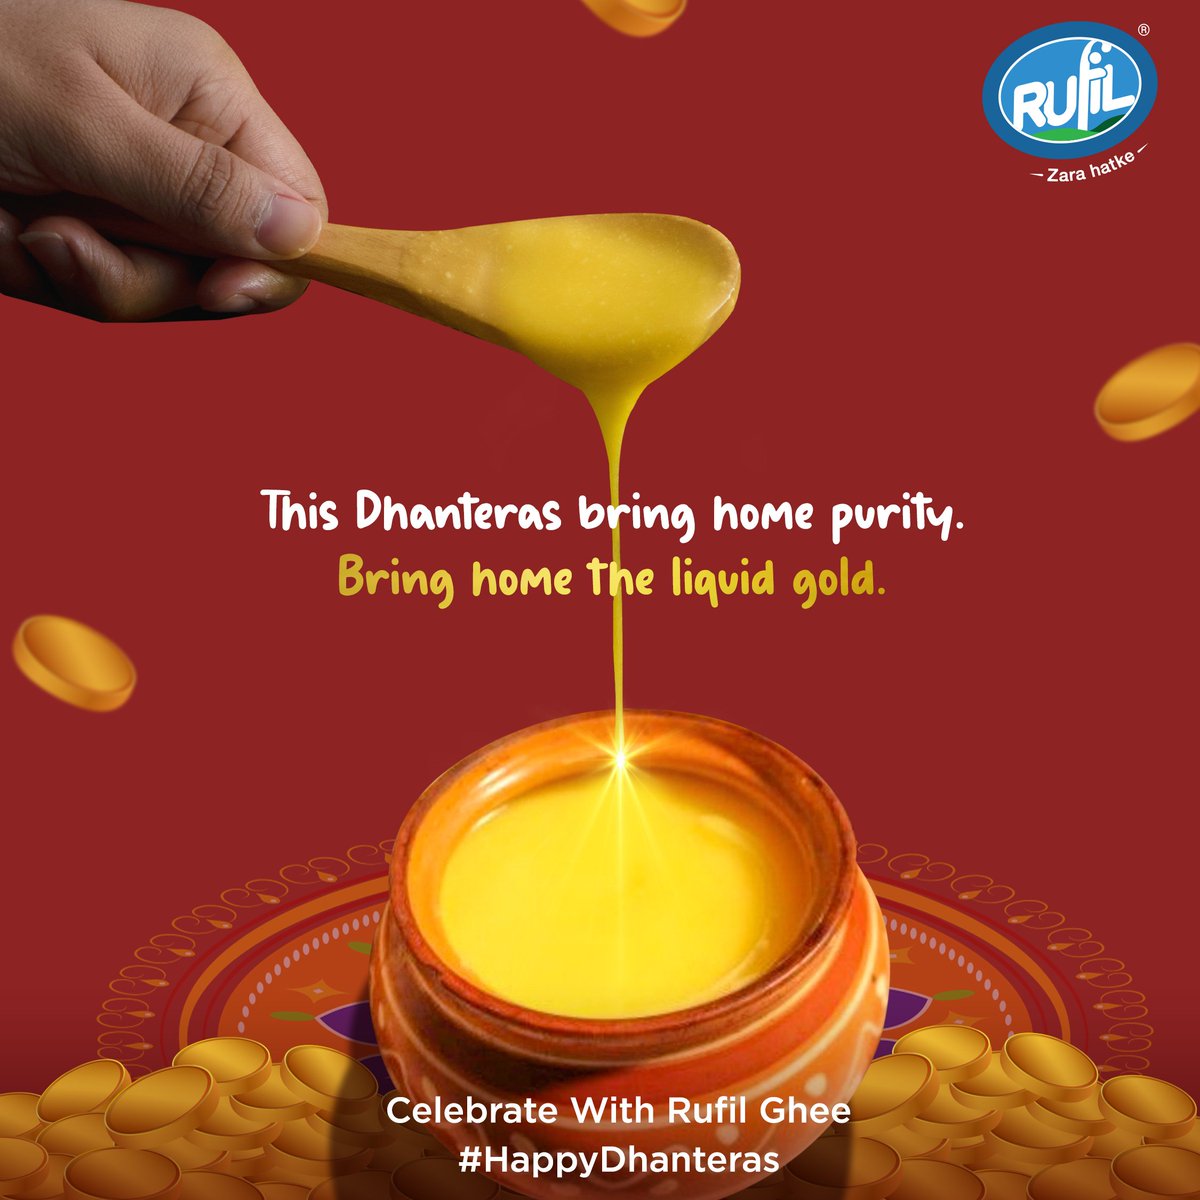 May you bask in the golden light of good health.

Happy Dhanteras! 

#Rufil
#Dhanteras2021 #dhanteraswishes
#DhanterasPuja #shudhghee